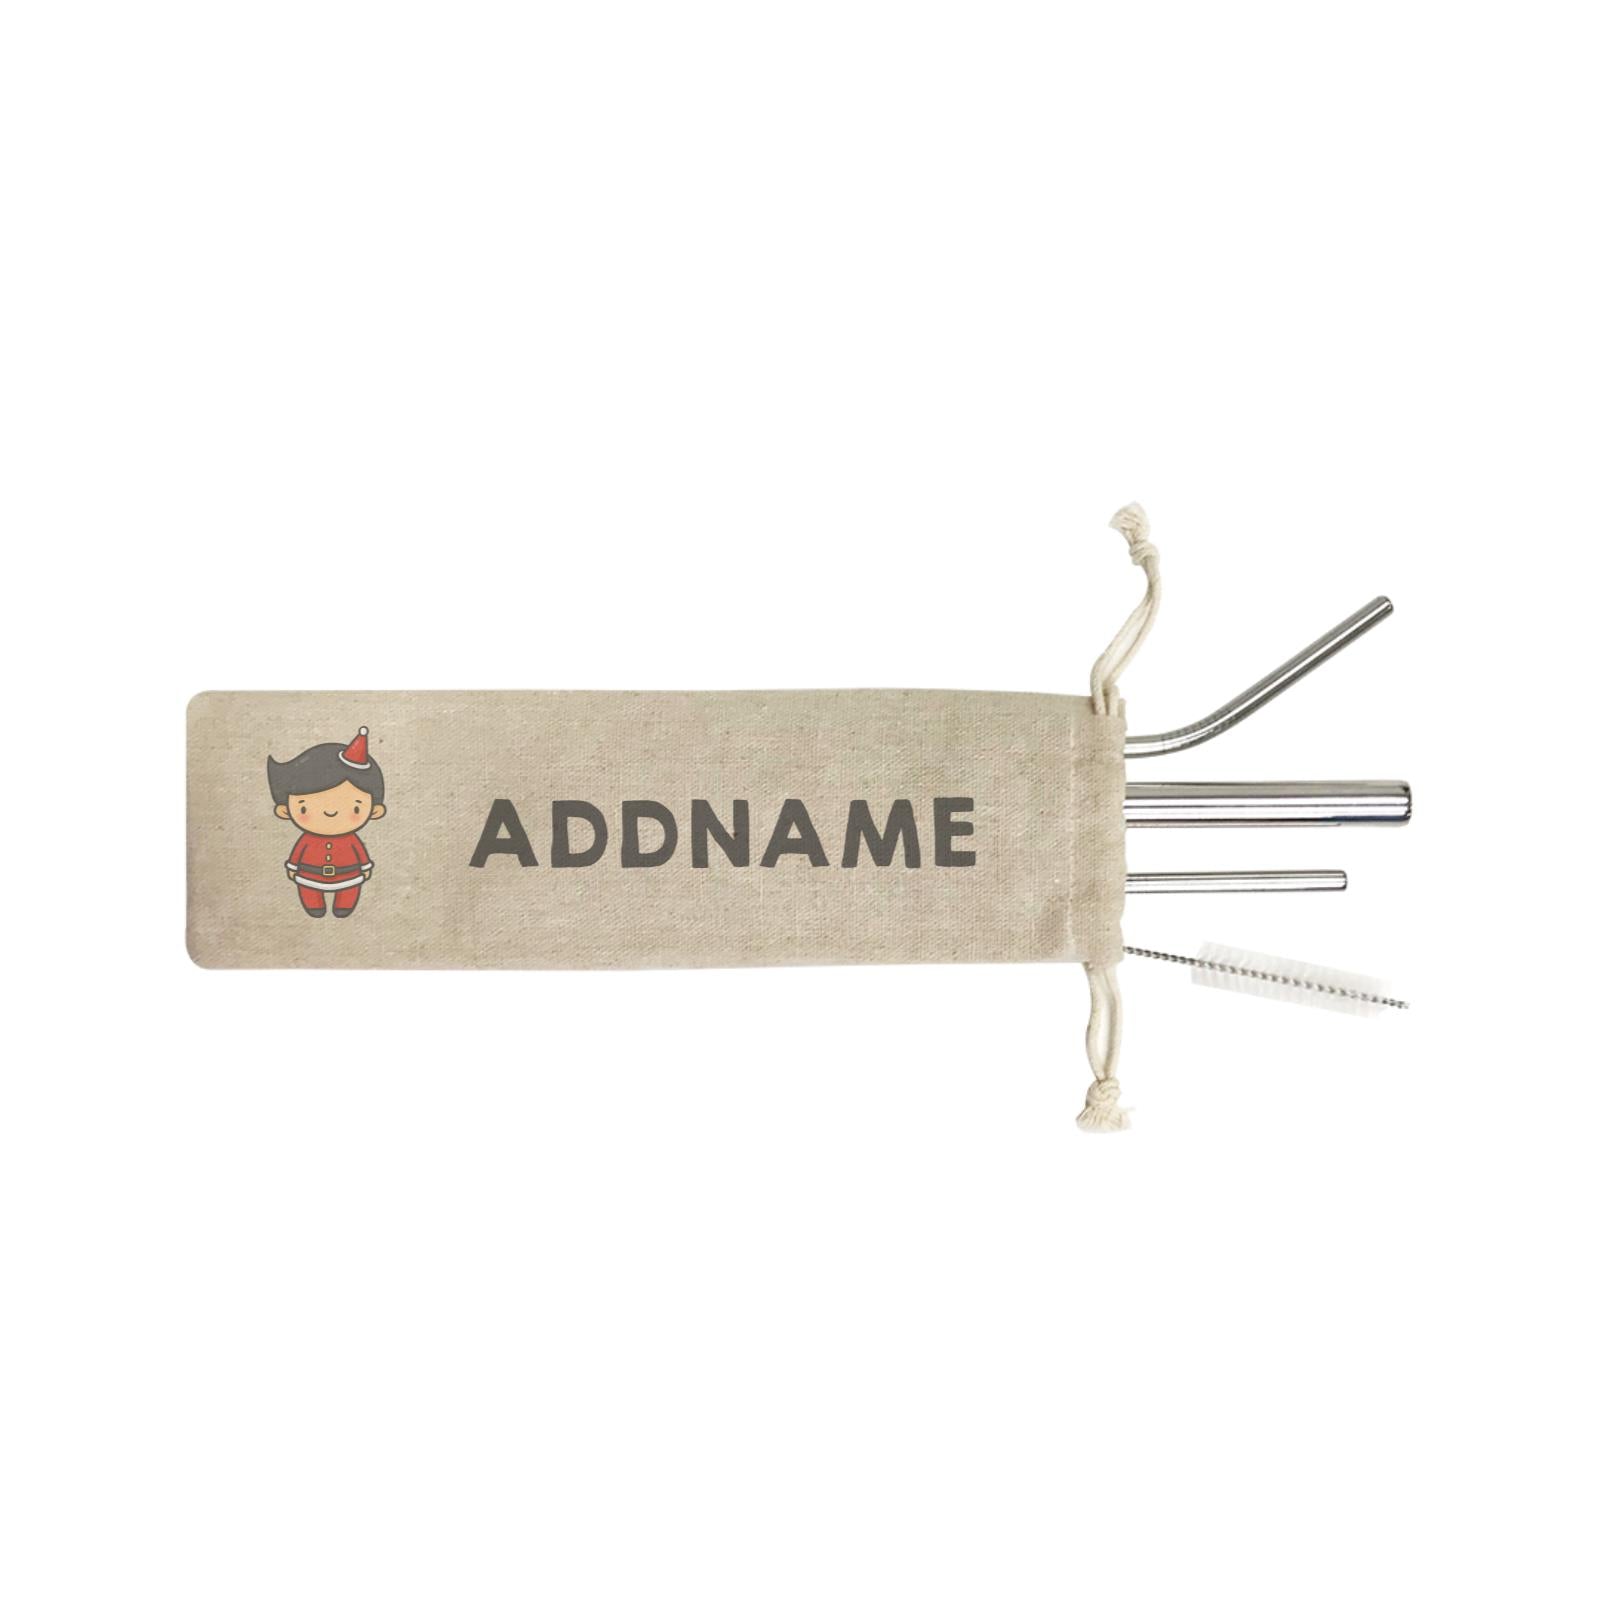 Xmas Cute Boy Addname SB 4-in-1 Stainless Steel Straw Set In a Satchel